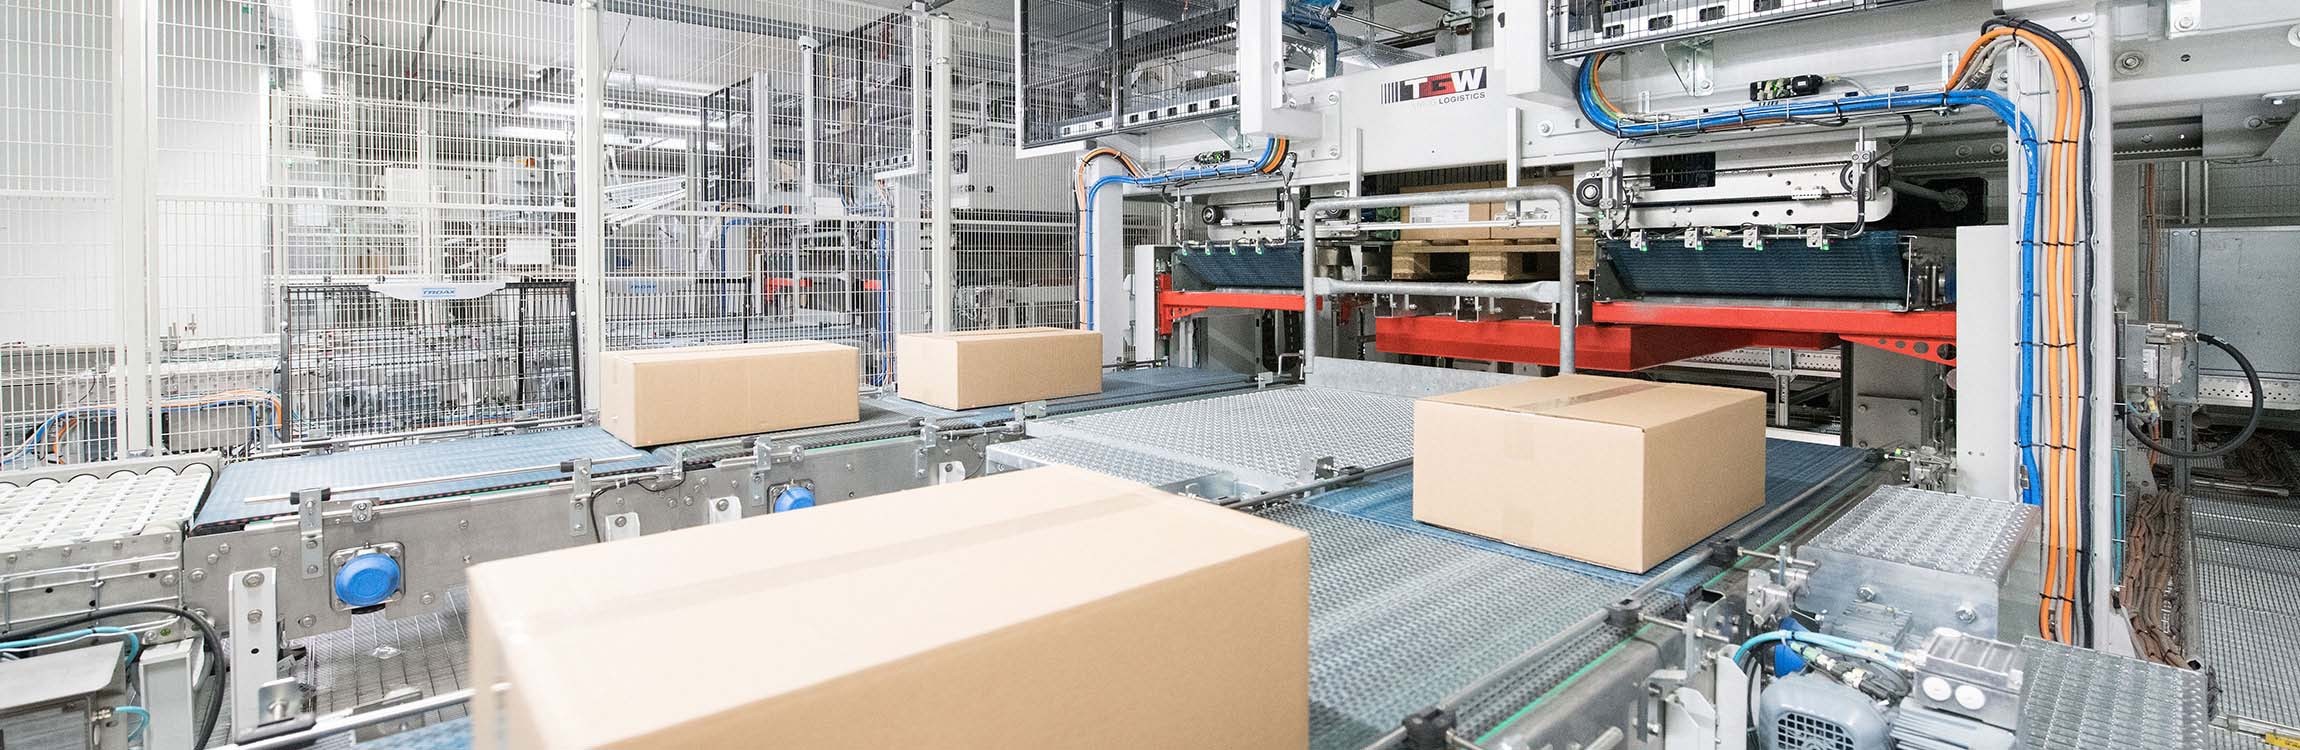 The fast, reliable and versatile intralogistics solution from TGW.